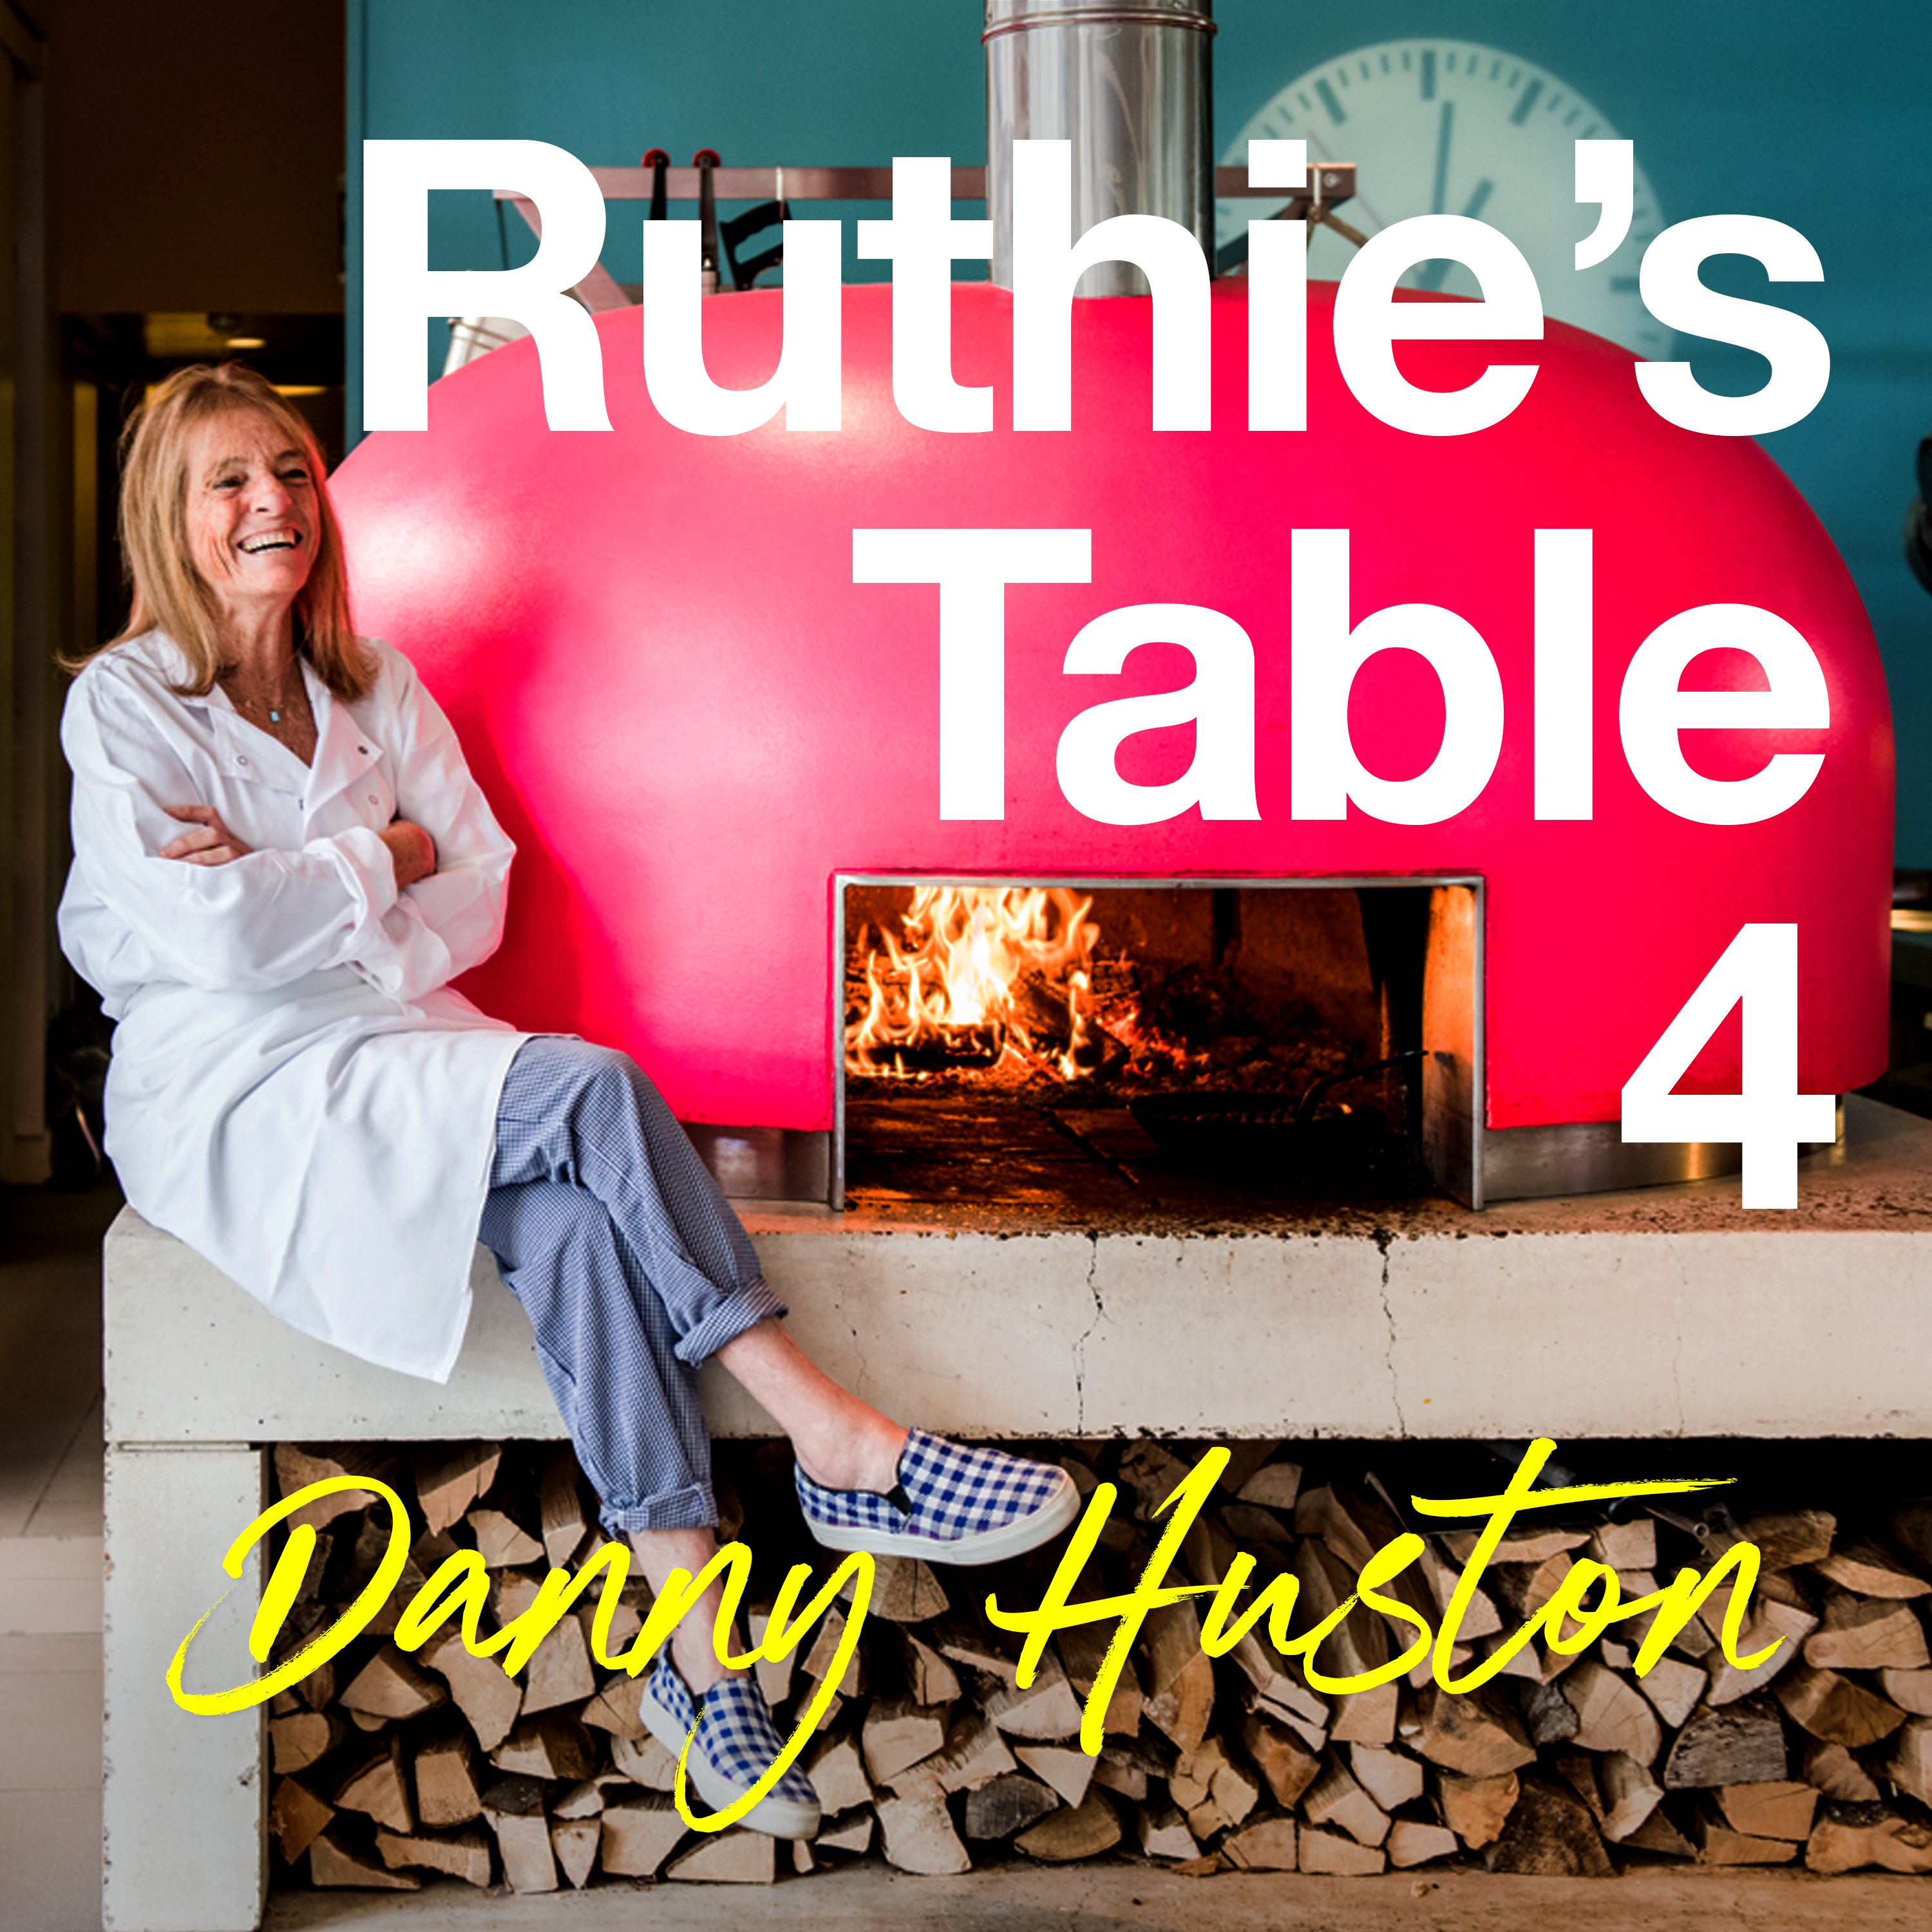 Ruthie's Table 4: Danny Huston